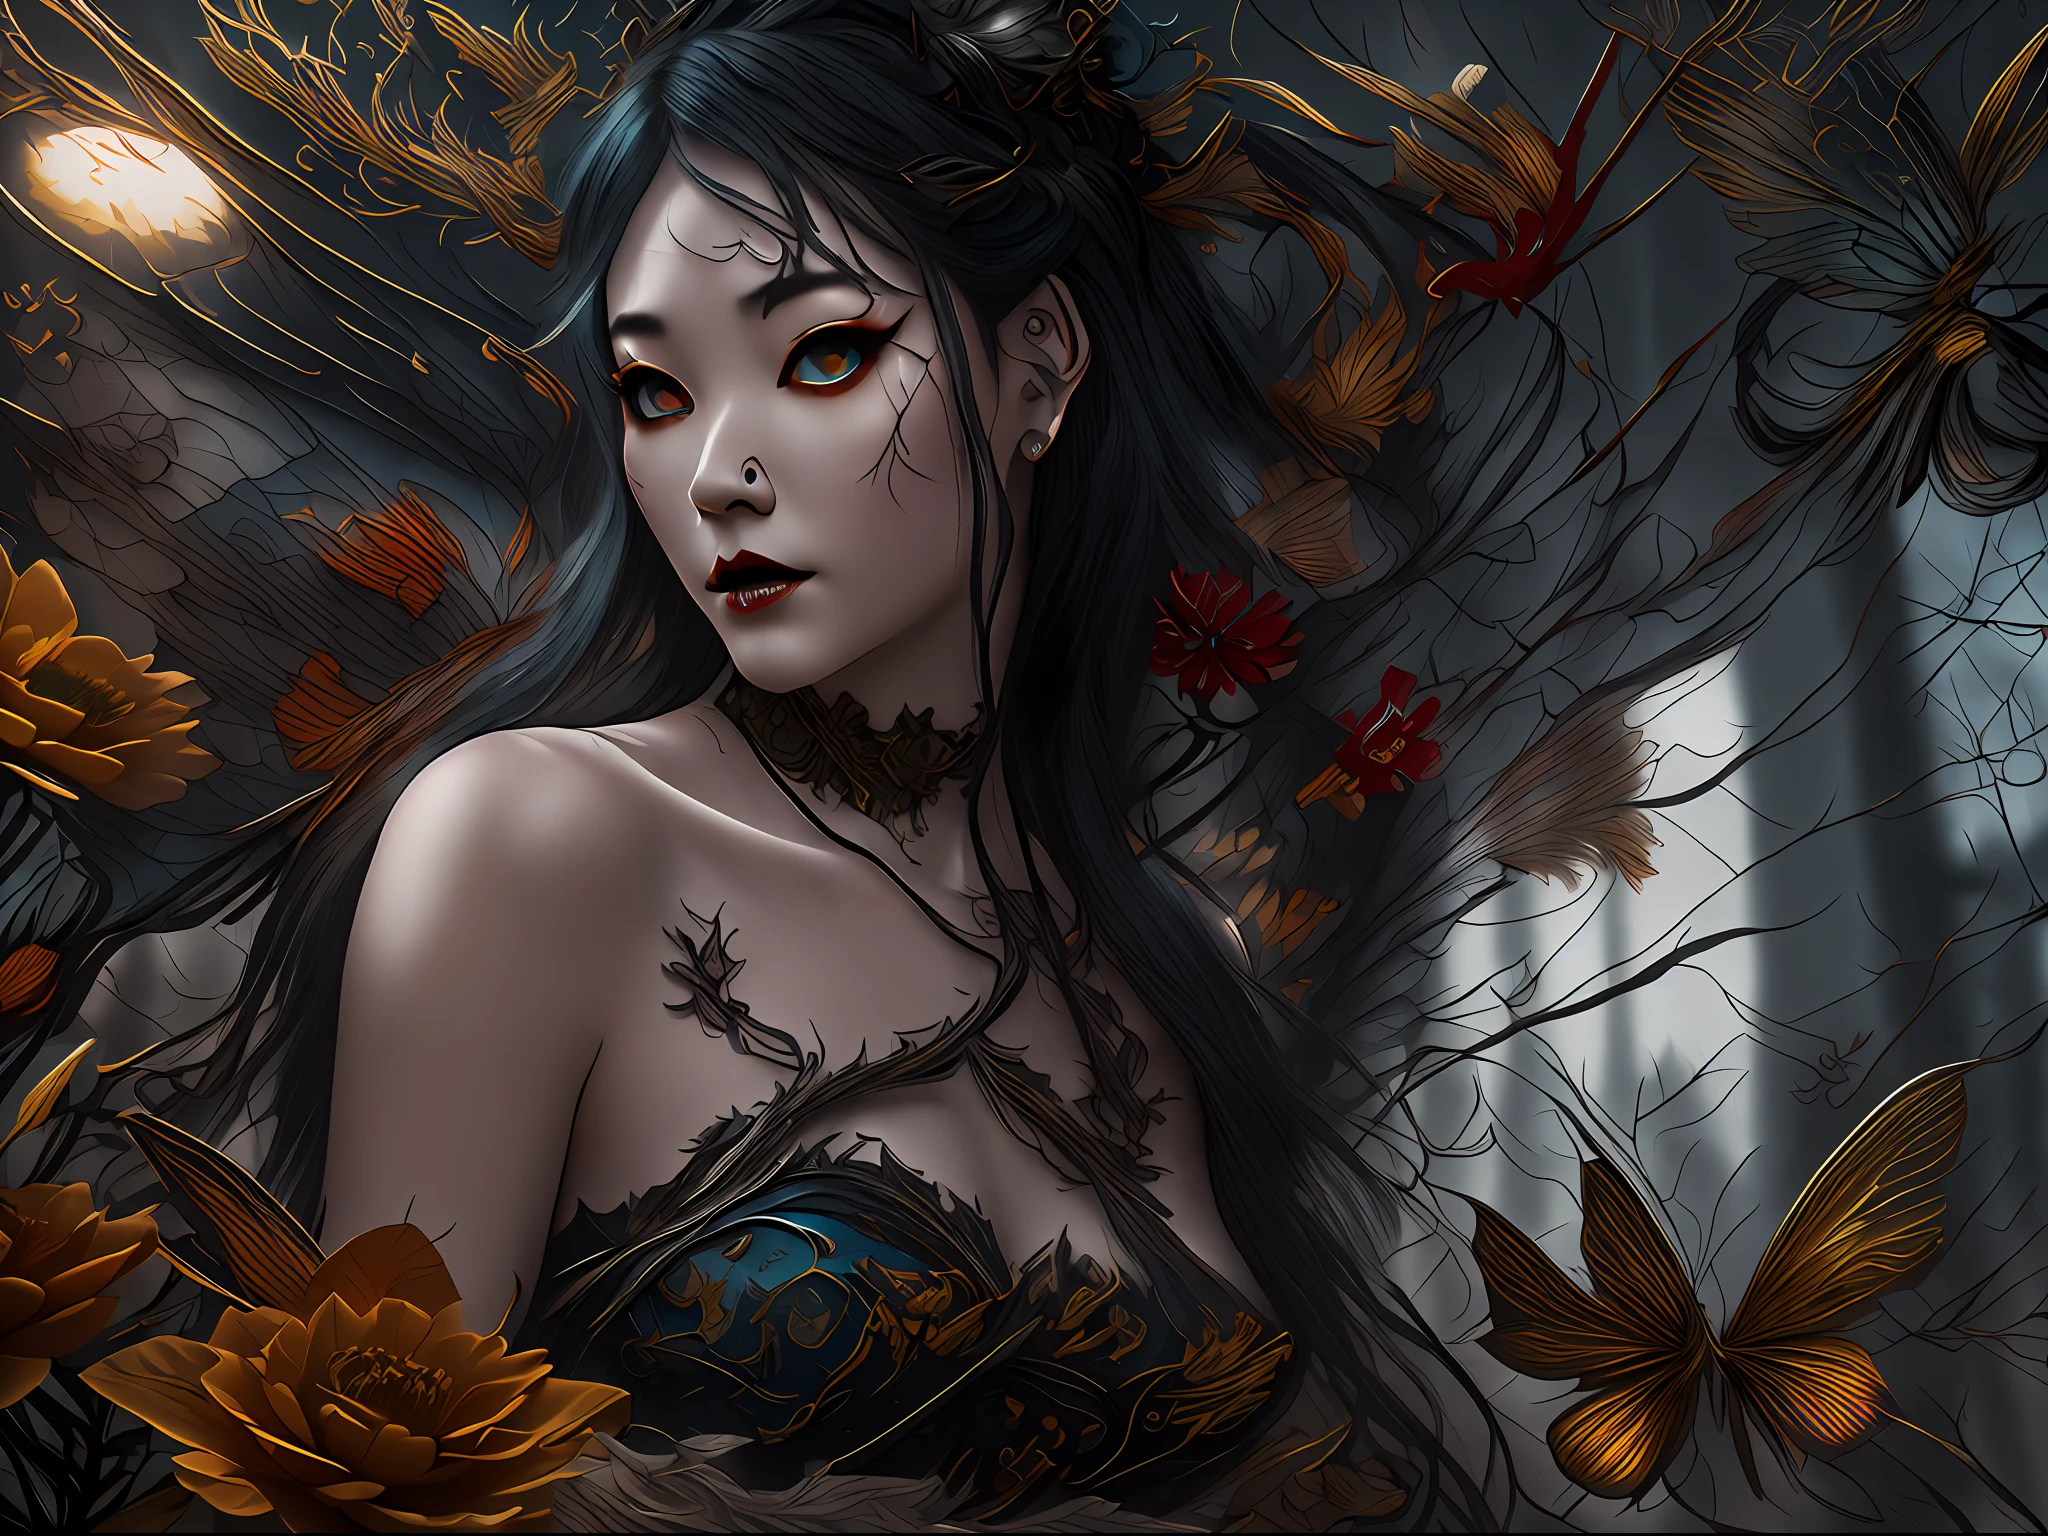 high details, best quality, 16k, RAW, [best detailed], masterpiece, best quality, (extremely detailed), full body, ultra wide shot, photorealistic, dark fantasy art, goth art, RPG art, D&D art, a picture of a dark female fairy showing flowers in a florist shop, extremely beautifil fairy, ultra feminine (intense details, Masterpiece, best quality), best detailed face (intense details, Masterpiece, best quality), having wide butterfly wings, spread buterfly wings (intense details, Masterpiece, best quality), dark colors wings (intense details, Masterpiece, best quality), black hair, long hair, shinning hair, flowing hair, shy smile, innocent smile, blue eyes, dark red lips, wearing red skirt, dynamic elegant shirt, chocker, wearing high heels, in flower shop (intense details, Masterpiece, best quality), [extreme many flowers] (intense details, Masterpiece, best quality), dark colorful flowers (intense details, Masterpiece, best quality), flower shop in a dark goth era street, model715,  High Detail, Ultra High Quality, High Resolution, 16K Resolution, Ultra HD Pictures, 3D rendering Ultra Realistic, Clear Details, Realistic Detail, Ultra High Definition